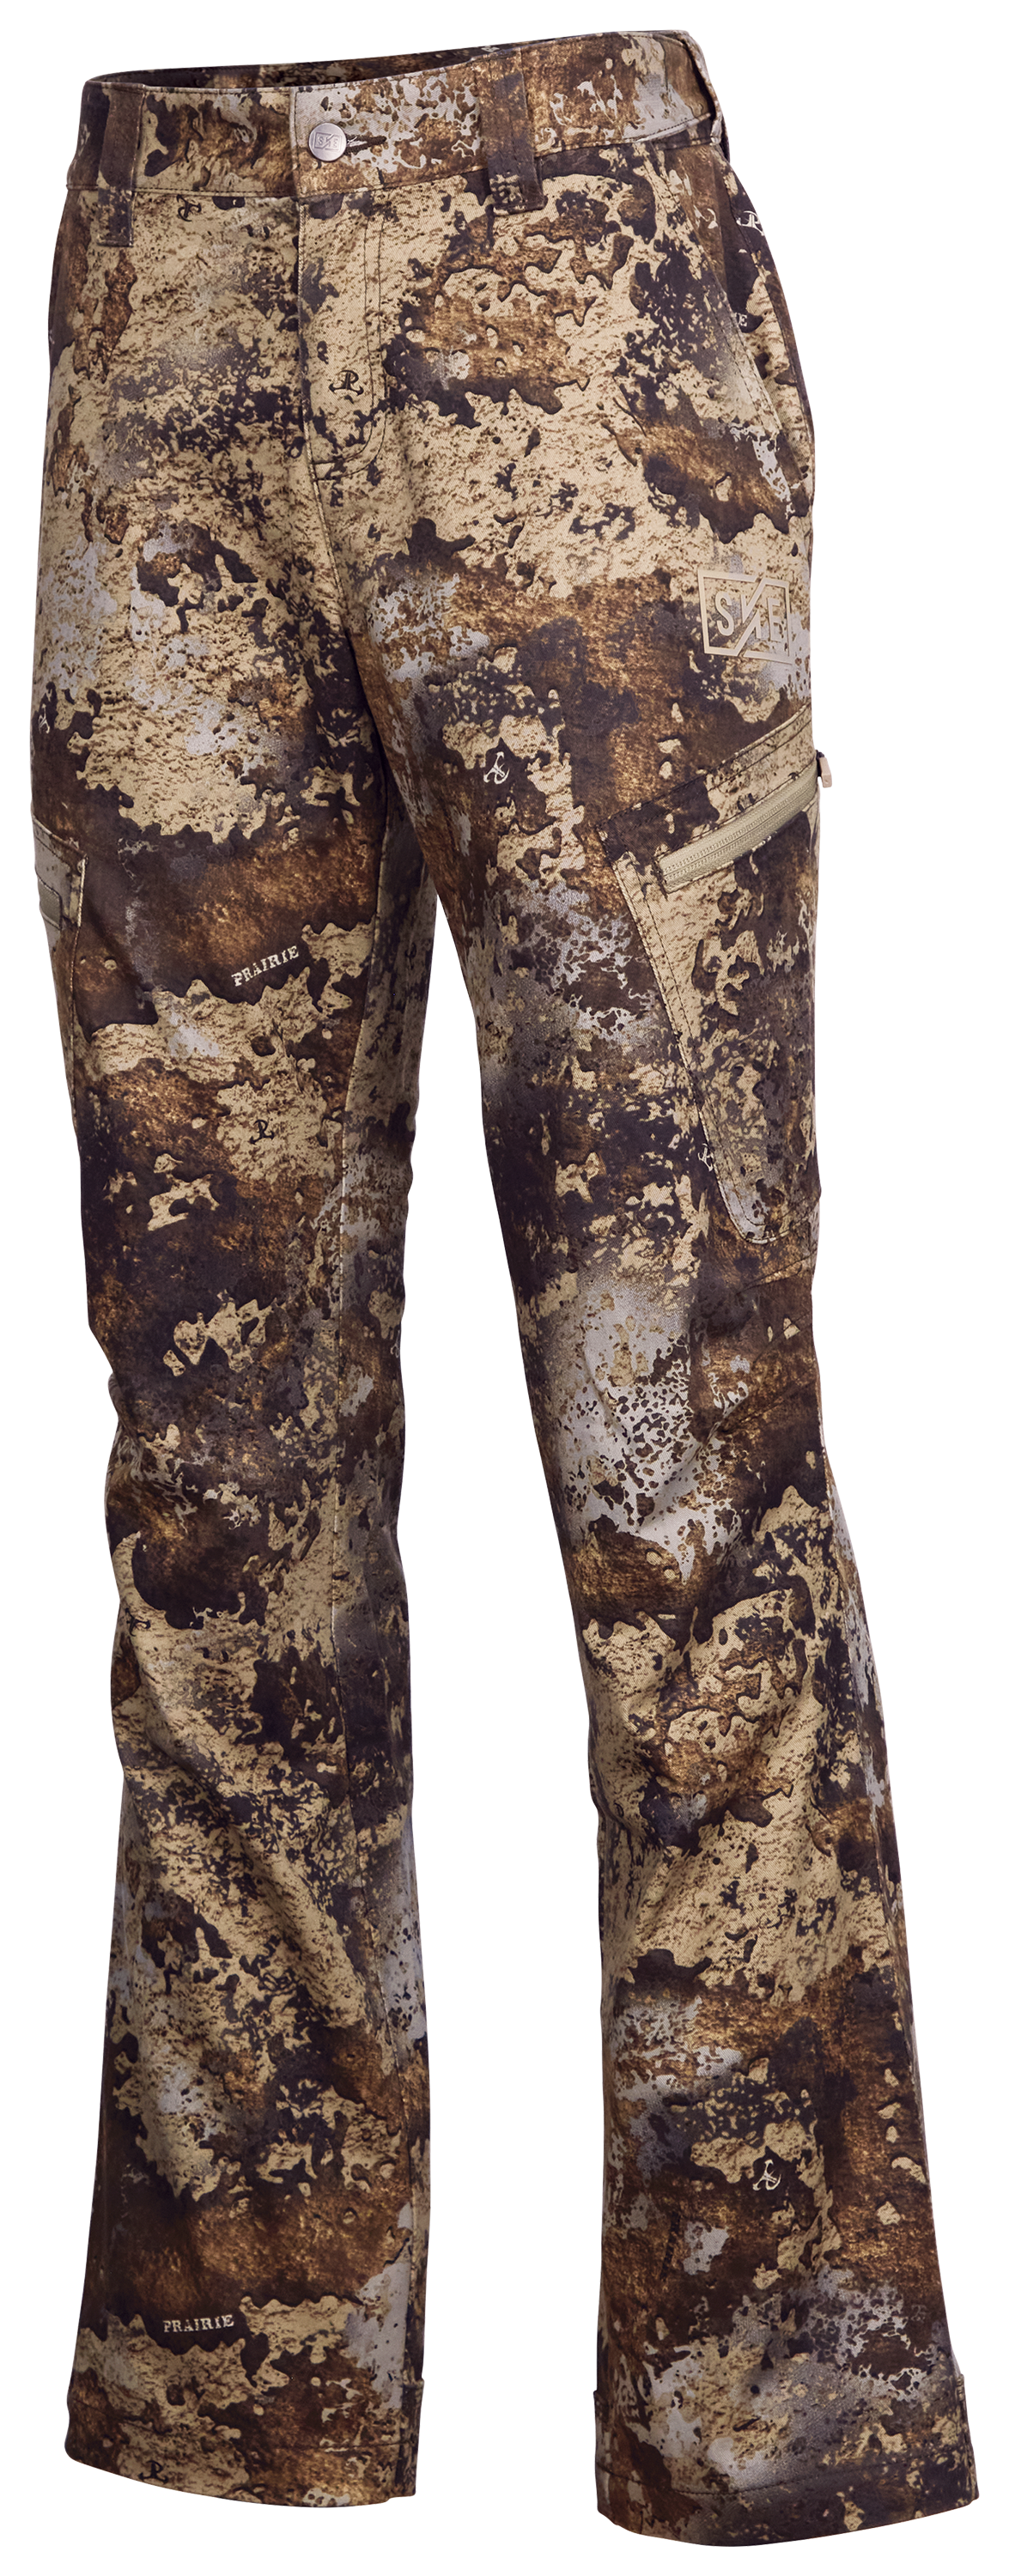 SHE Outdoor Utility II Pants for Ladies